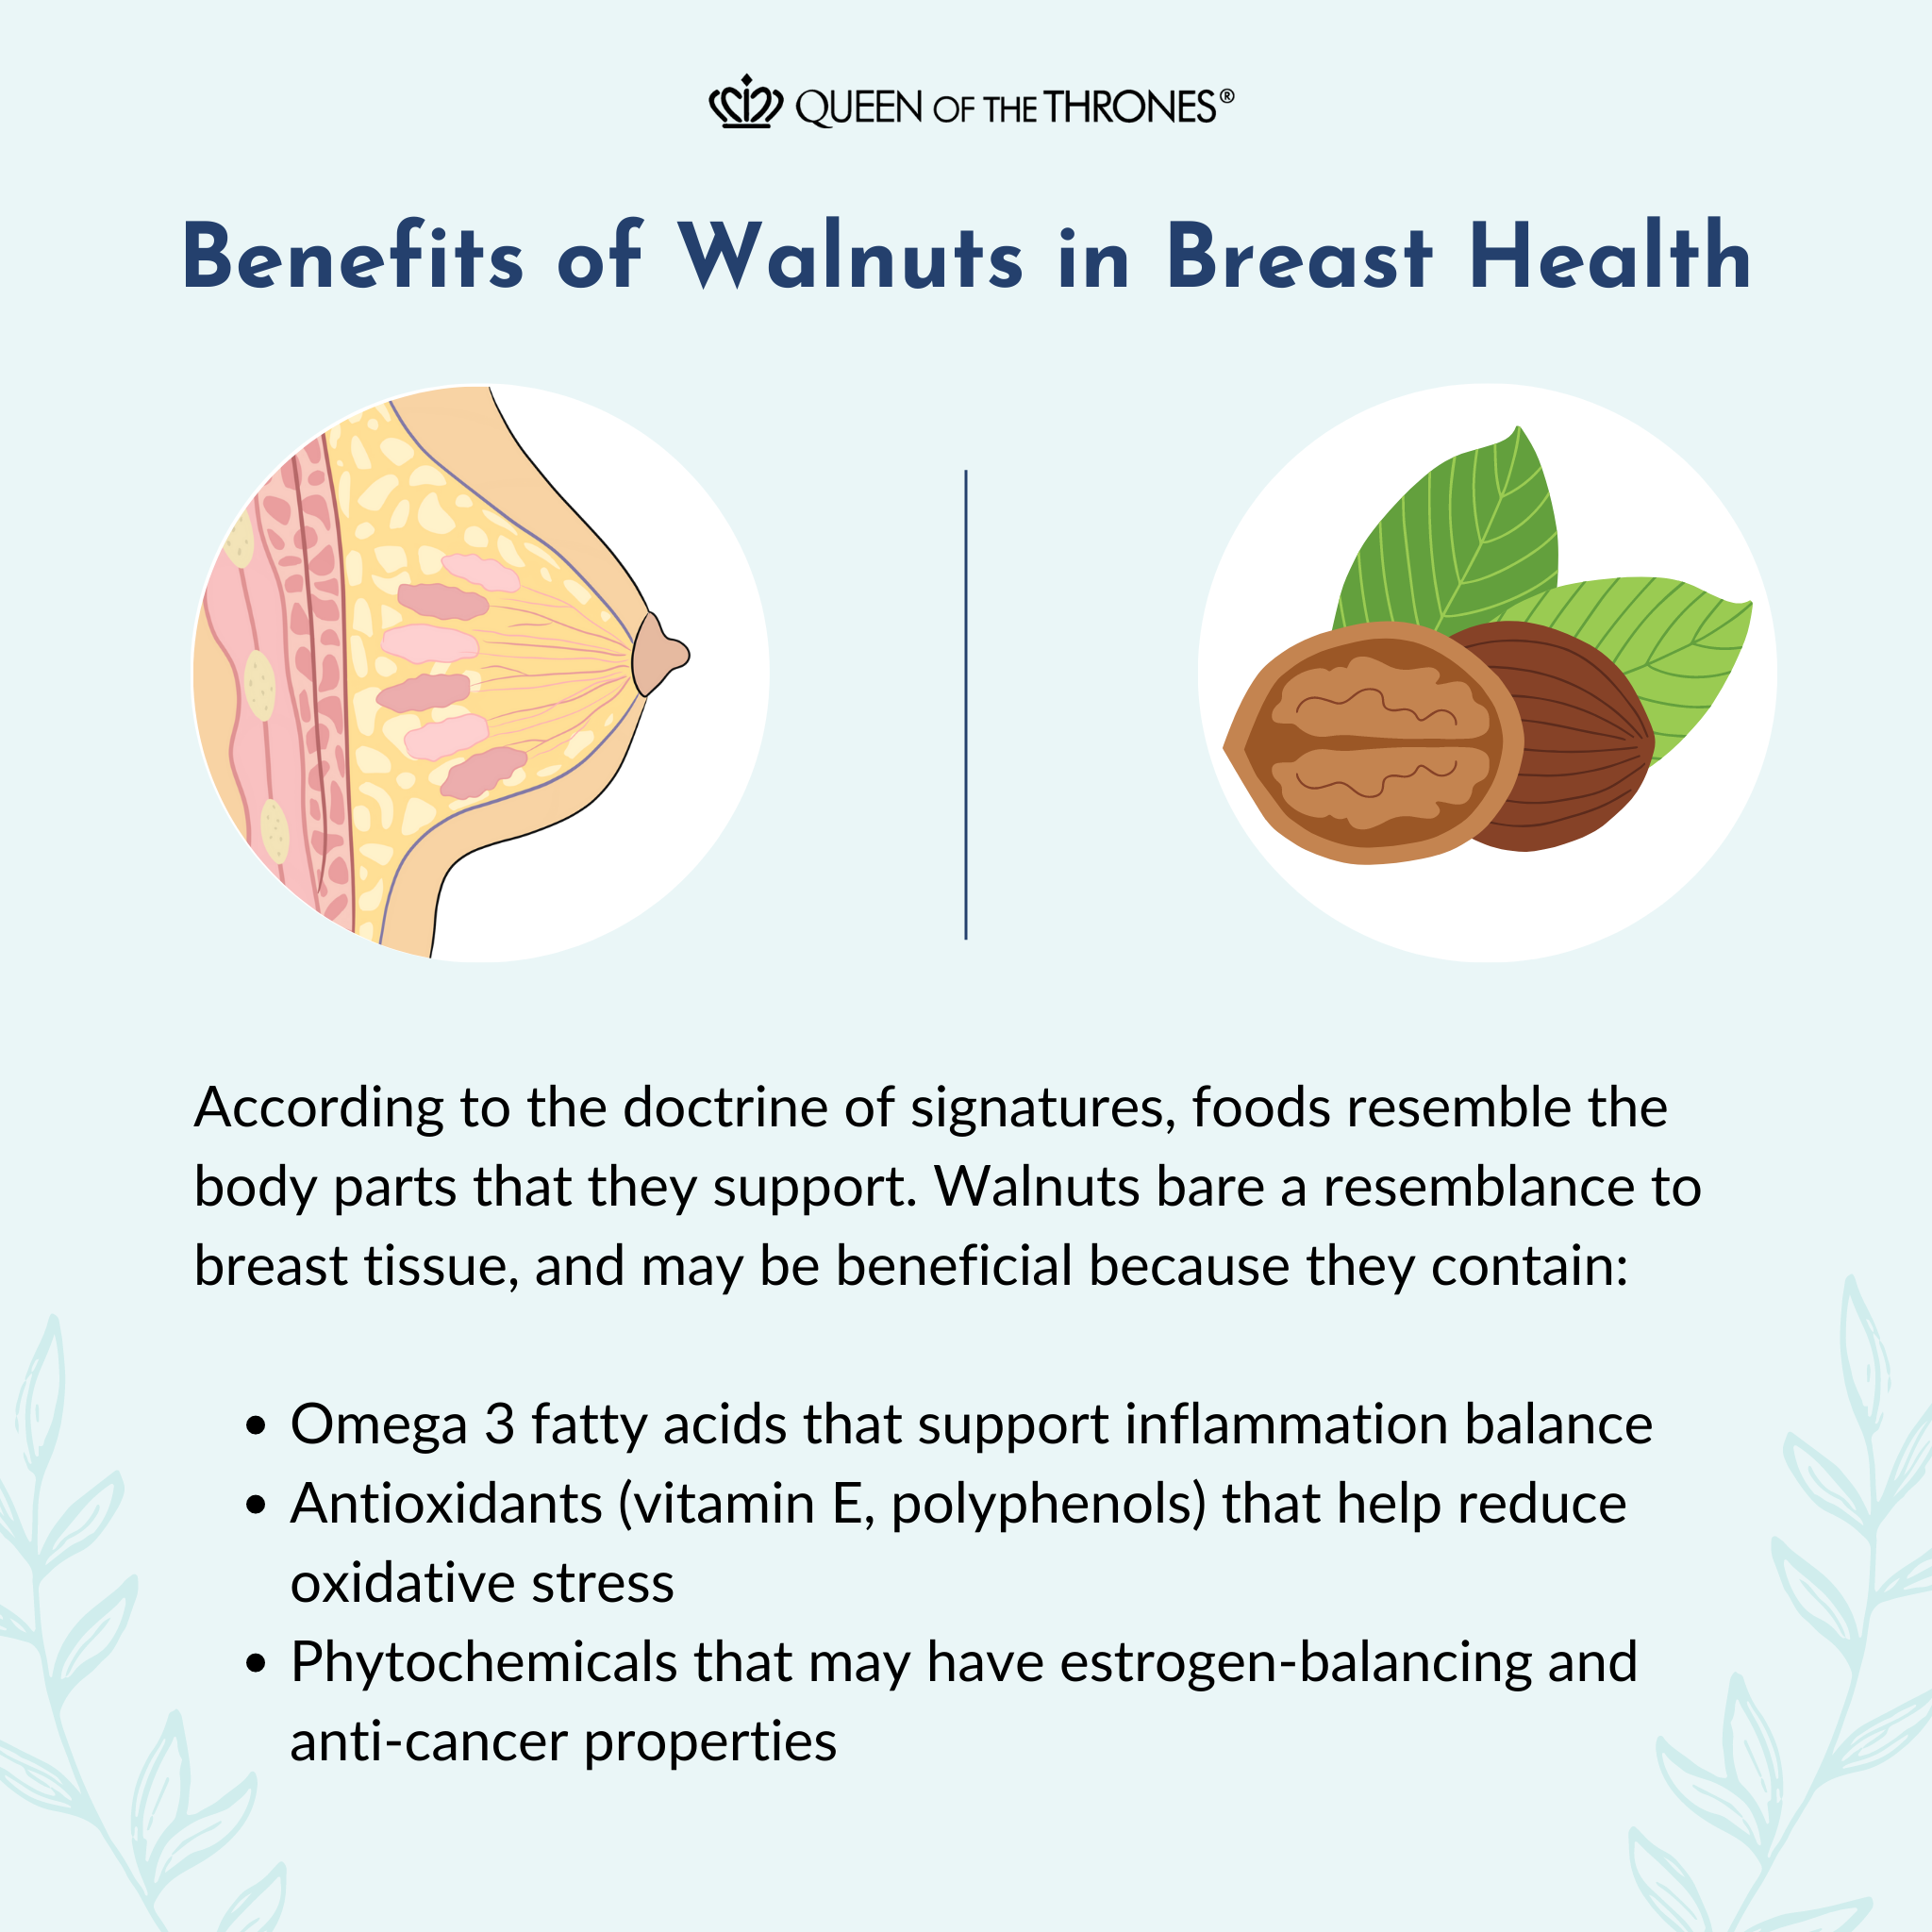 Walnuts are recommend to improve breast health by Queen of the Thrones